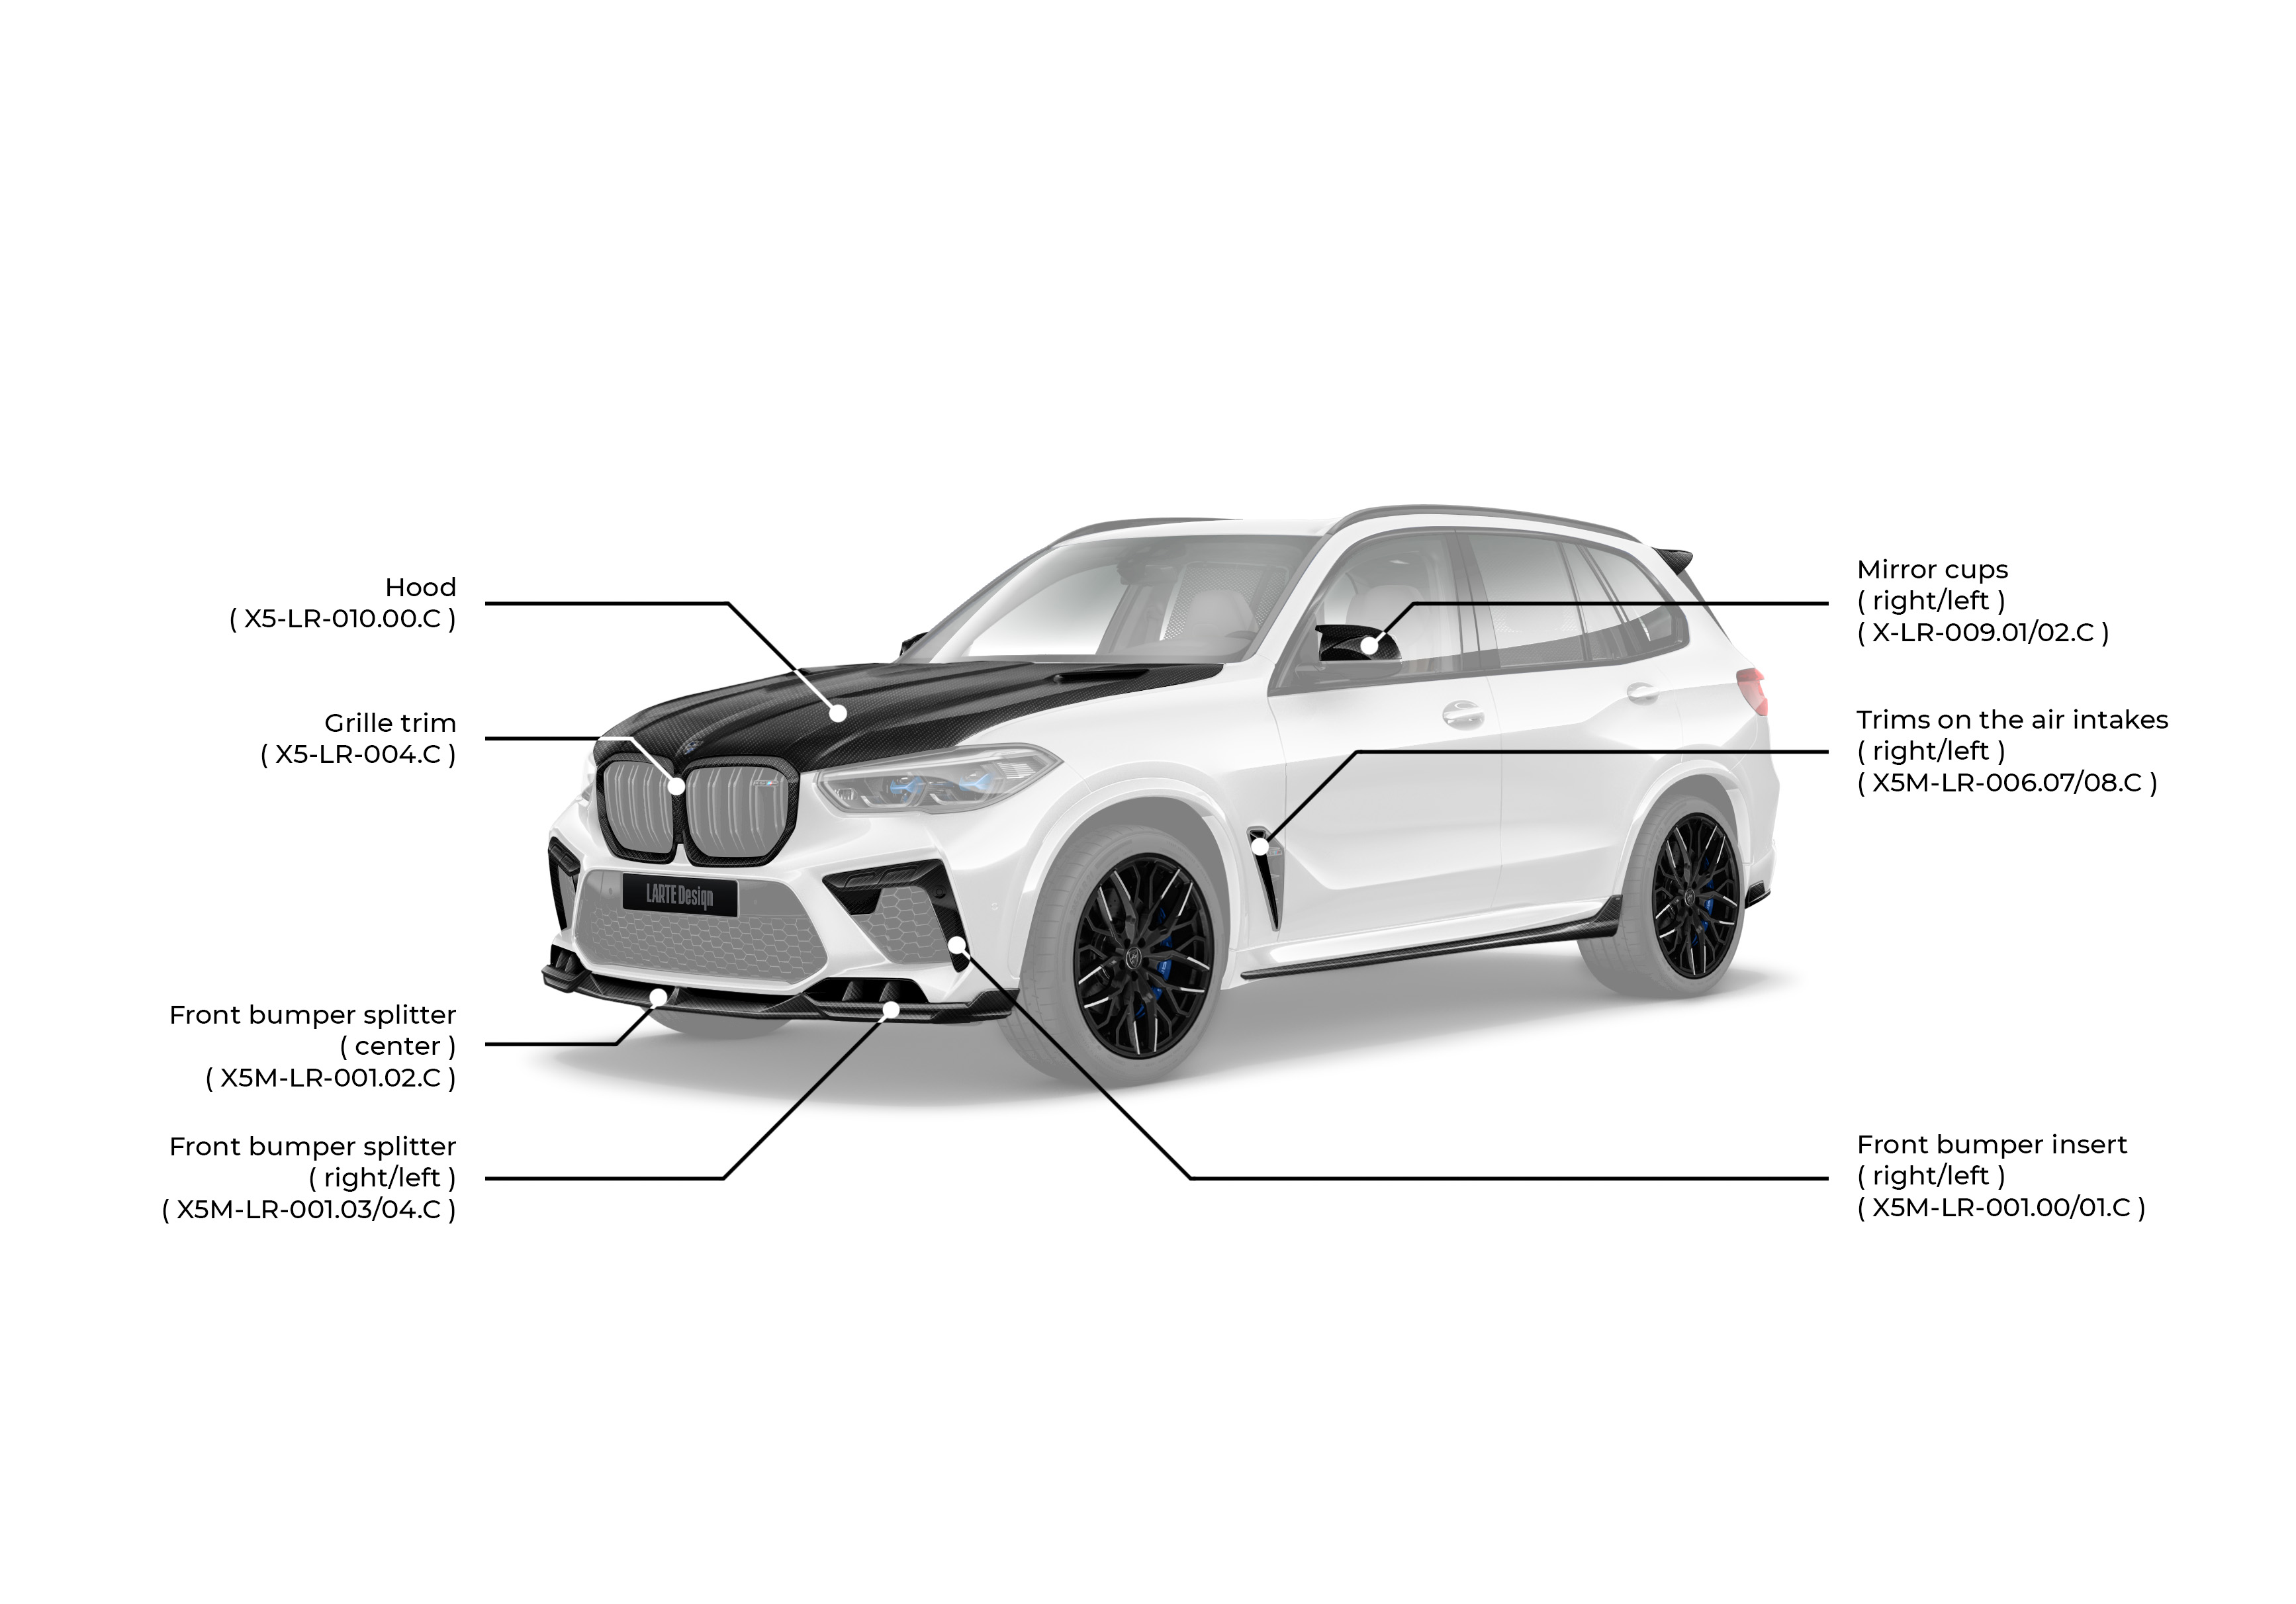 LARTE Design Carbon Parts for BMW X5 and X6 - MANHART Performance - True  High Performance Cars